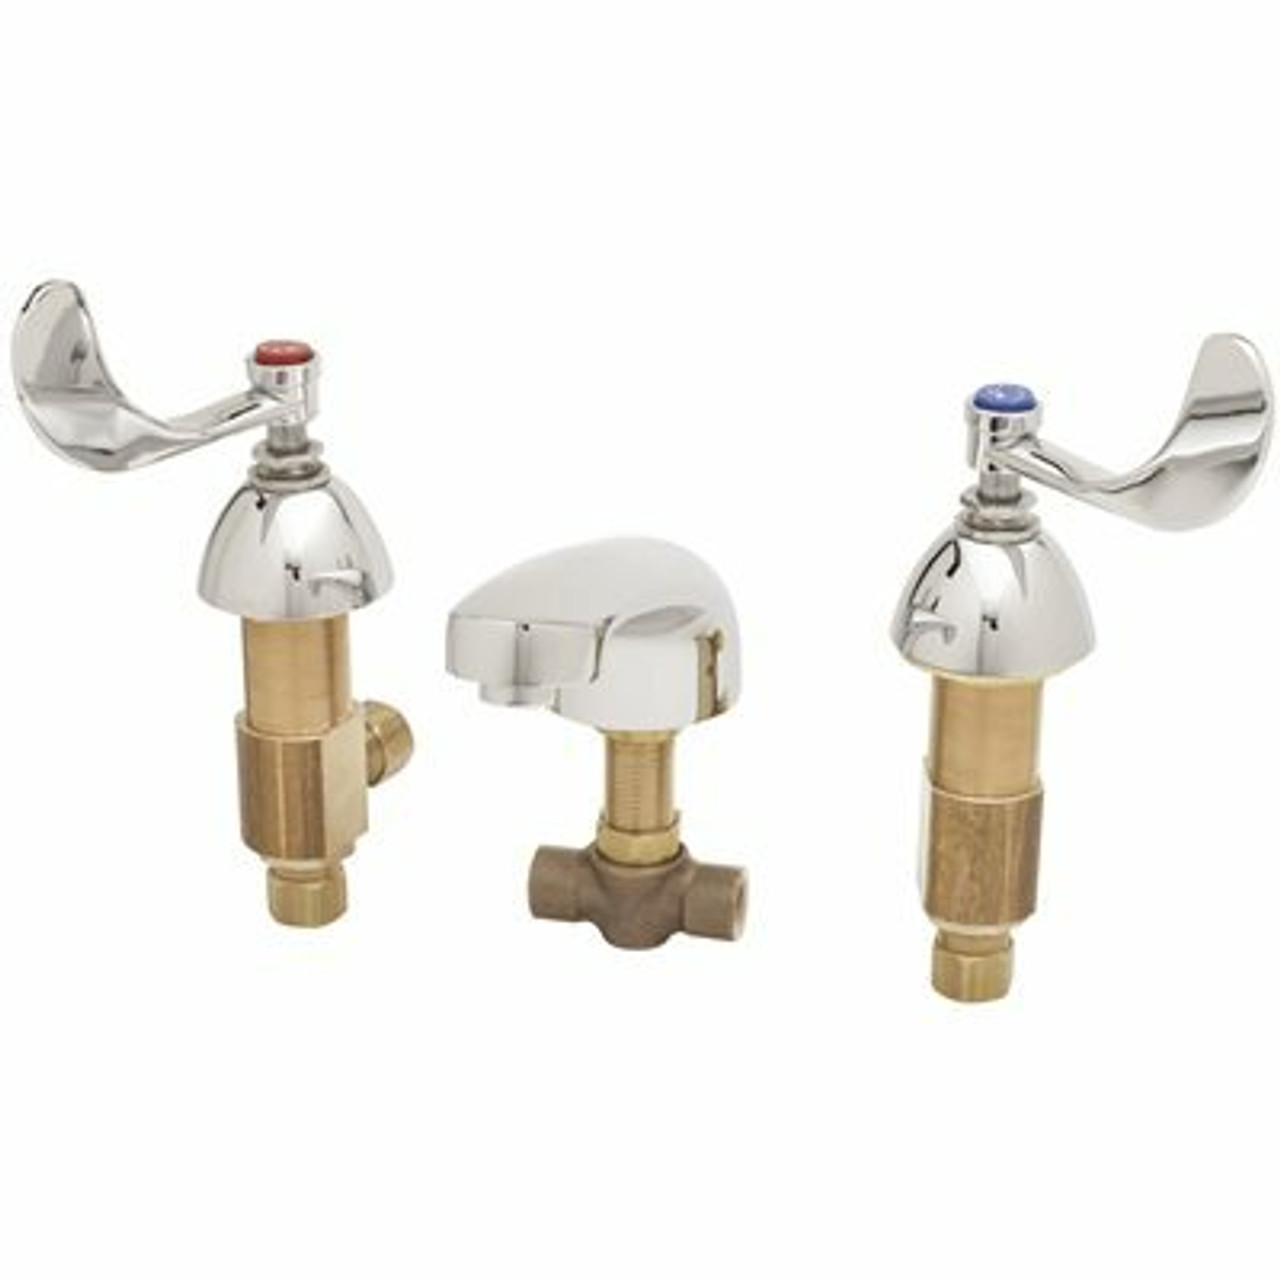 T&S Deck Mount Mixing Bathroom Faucet With 8 In. Centers, Flexible Supplies, And 4 In. Wrist Action Handles